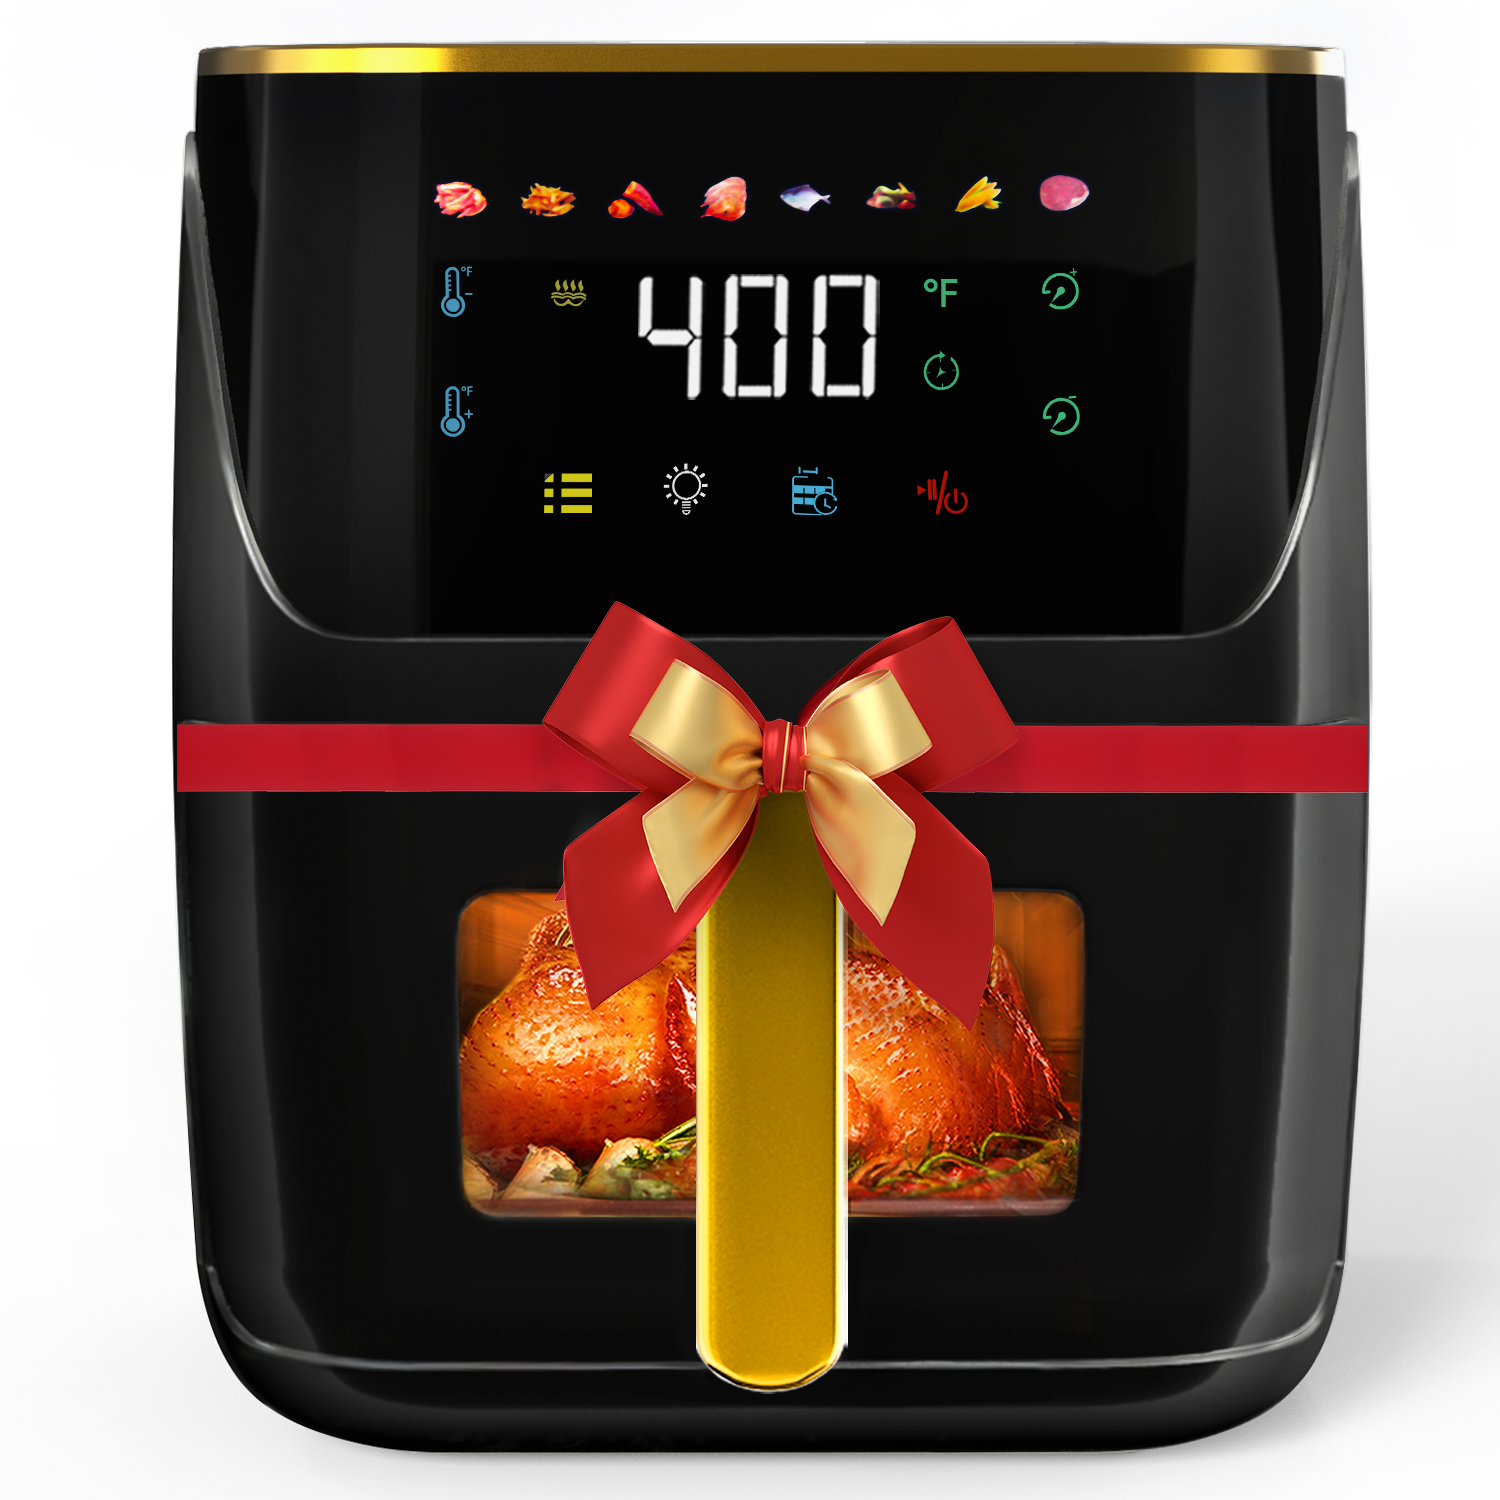 Newest Air Fryer Large 8.5 QT, 8 In 1 Touch Screen, Visible Window, 1750W Power